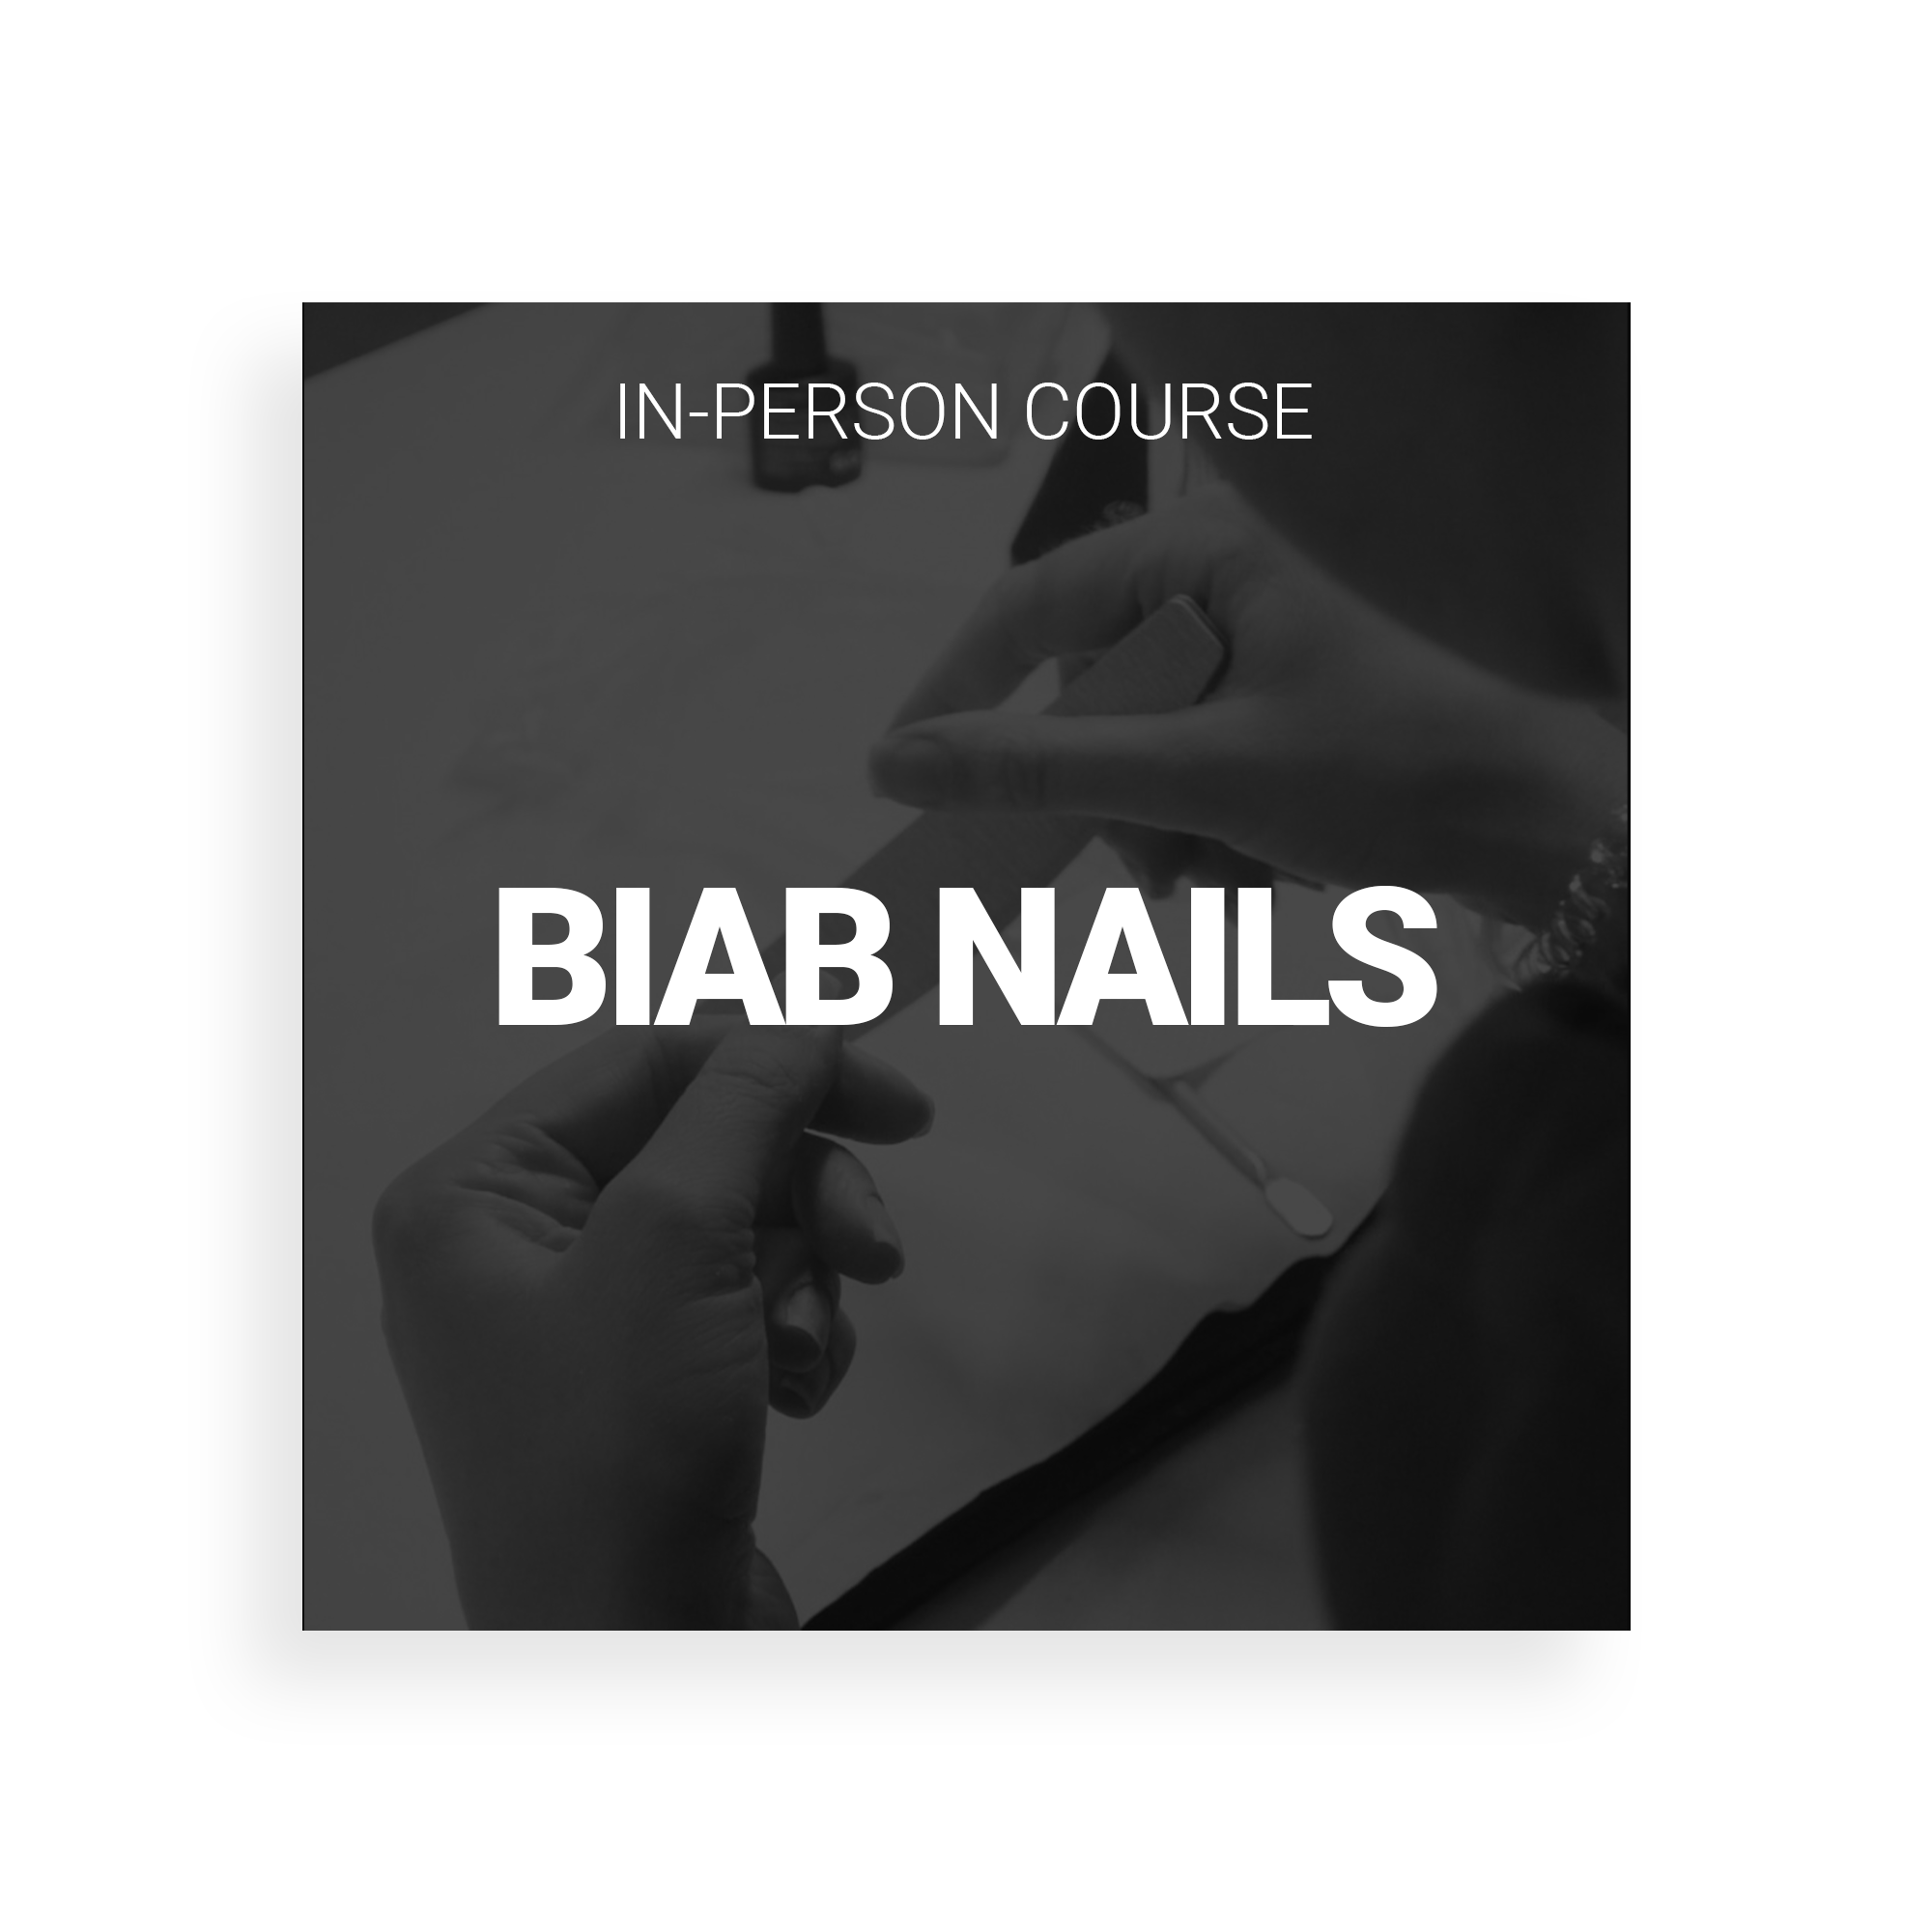 BIAB (BUILDER IN A BOTTLE) NAILS + E-FILE TRAINING